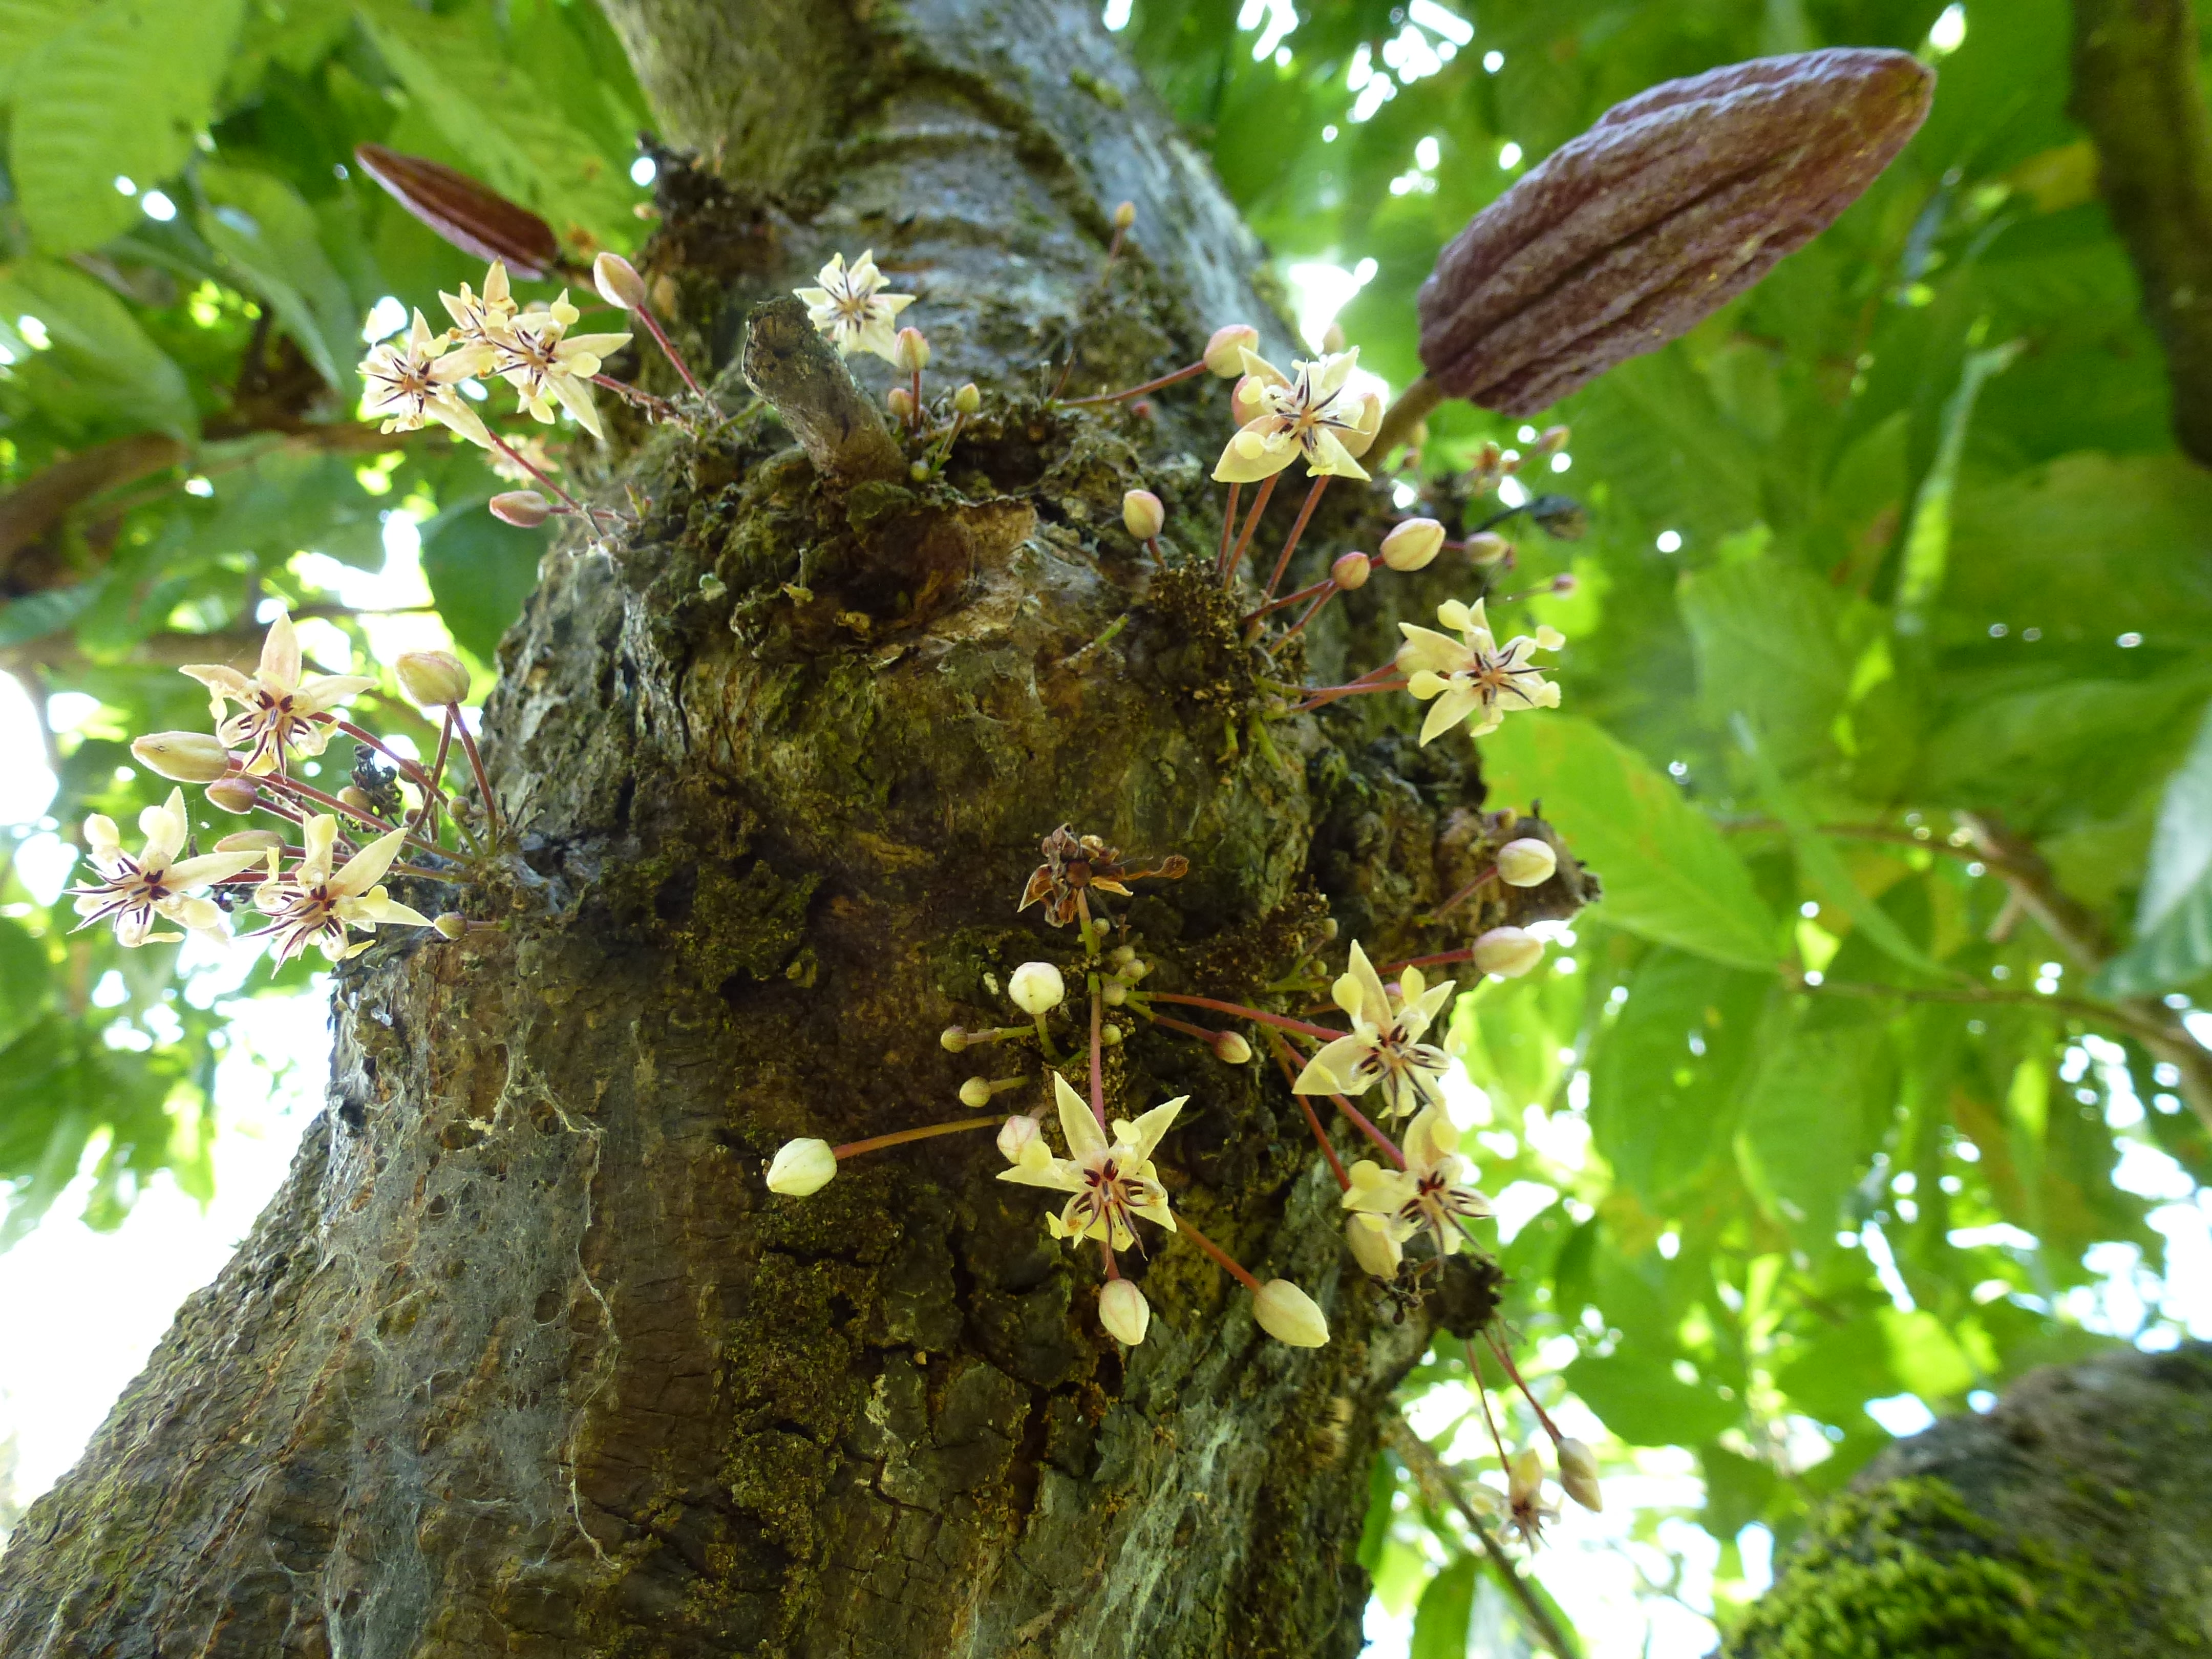 A blooming cacao tree